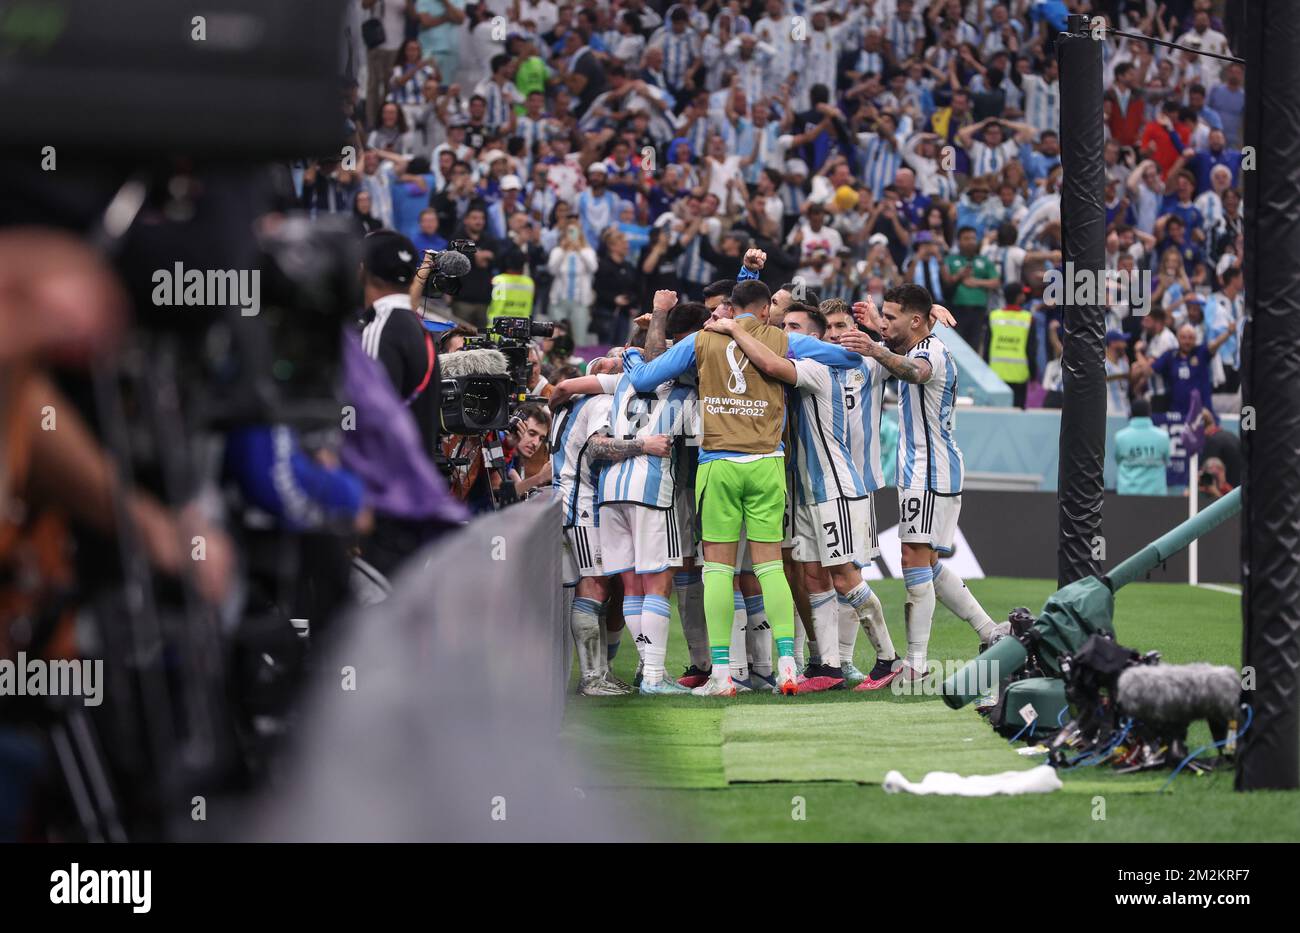 LUSAIL STADIUM, QATAR - DECEMBER 13: Argentinian team celebrating during the FIFA World Cup Qatar 2022 semi-final match between Croatia and Argentina at Lusail Stadium on December 13, 2022 in Qatar. Photo: Igor Kralj/PIXSELL Stock Photo